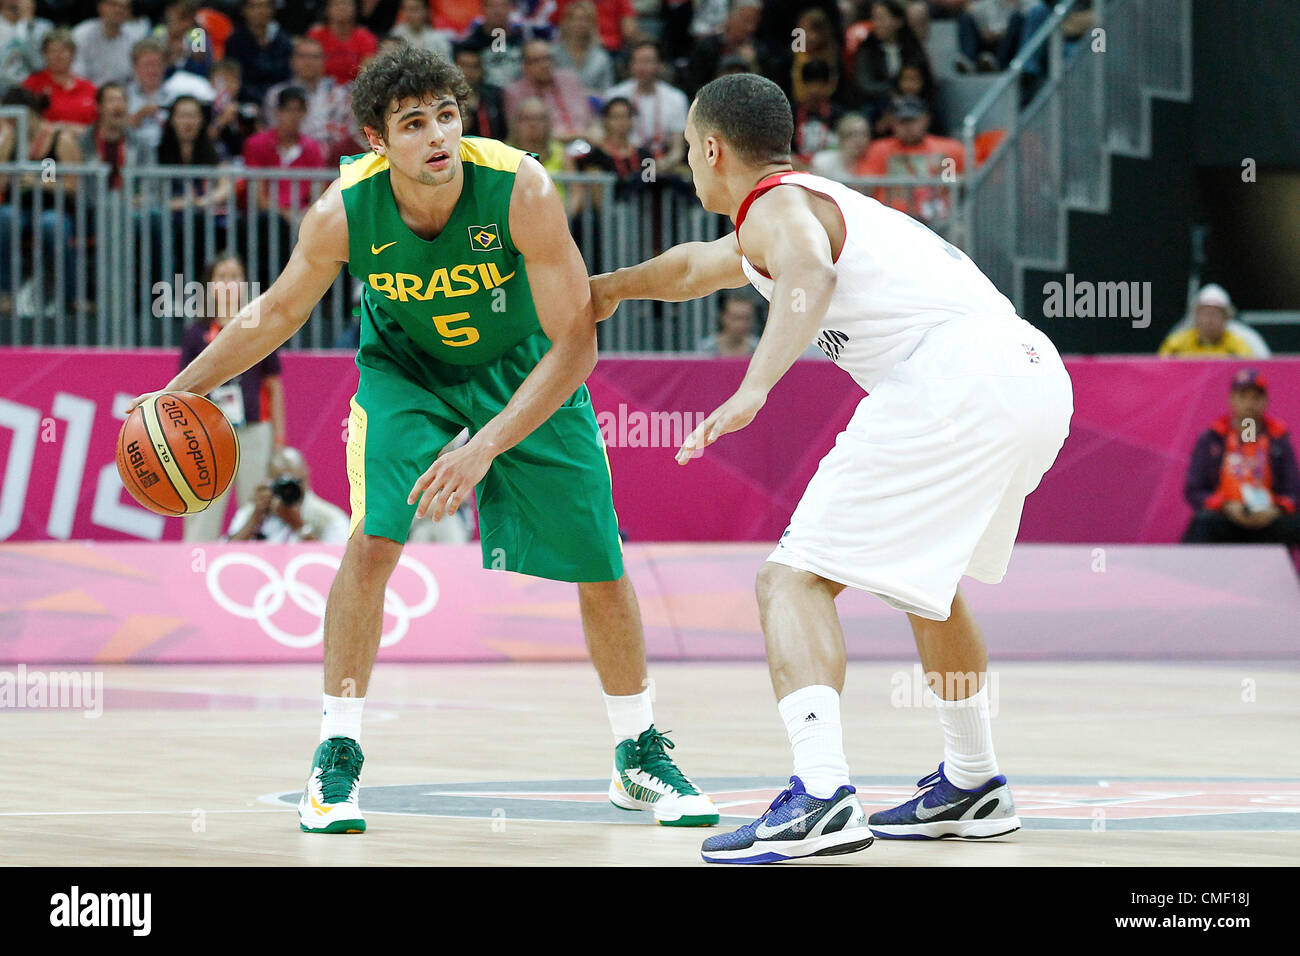 31.07.2012. London, England. 2012 Olympic  Basketball tournament.  Brazil Raul Neto looks to pass the ball during 67-62 Team Brazil victory over Team Great Britain, during the men's basketball preliminary, at the Basketball Arena, in London, Great Britain. Stock Photo